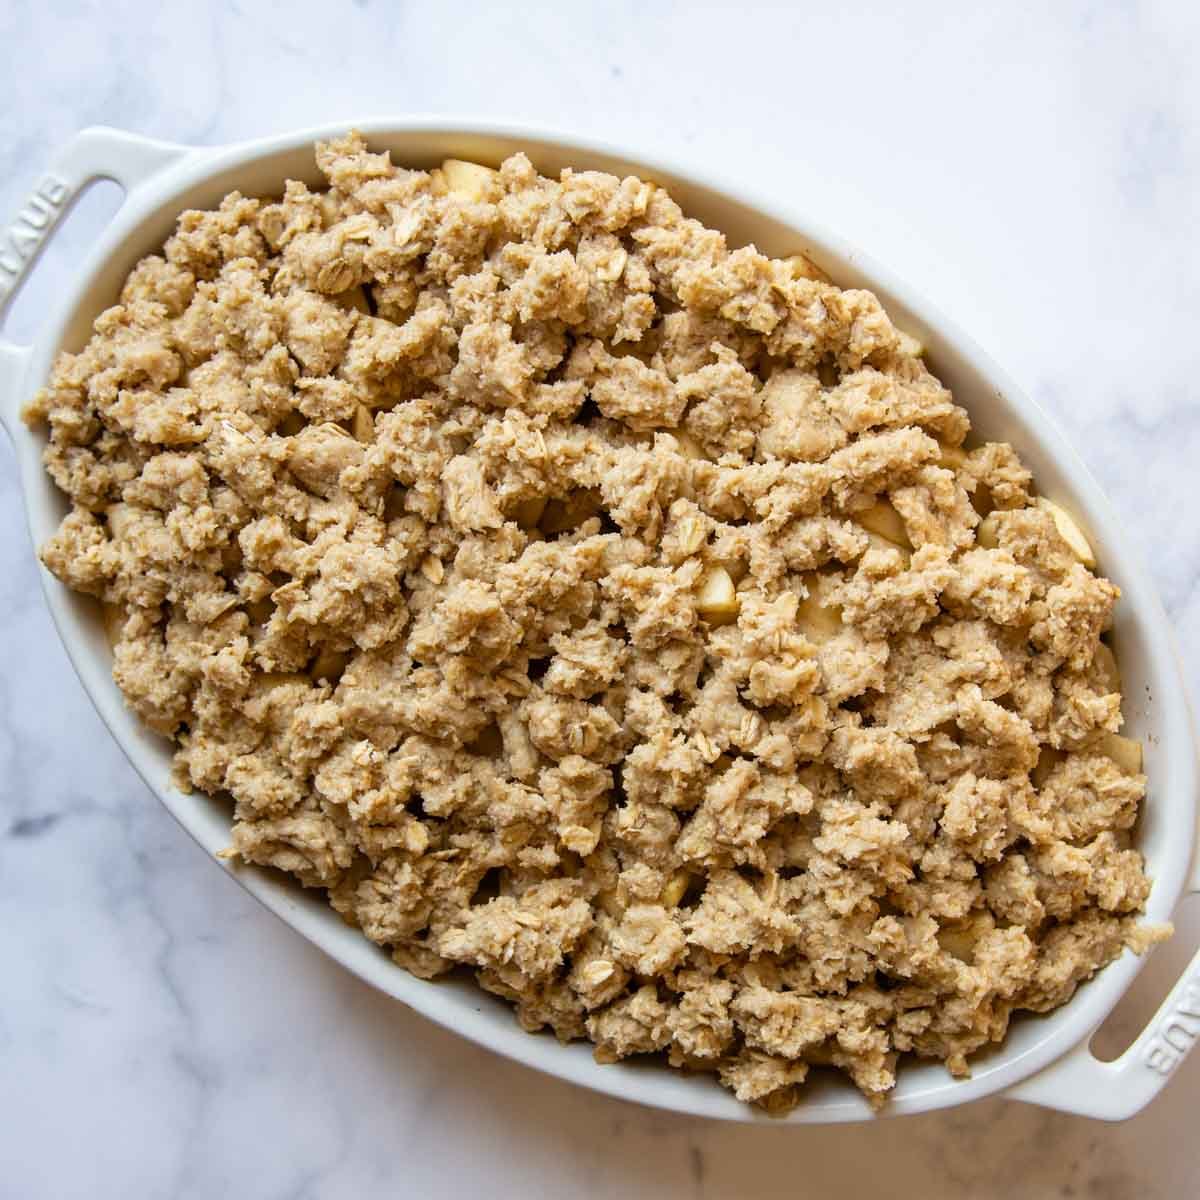 unbaked apple crisp with crumble topping on it.